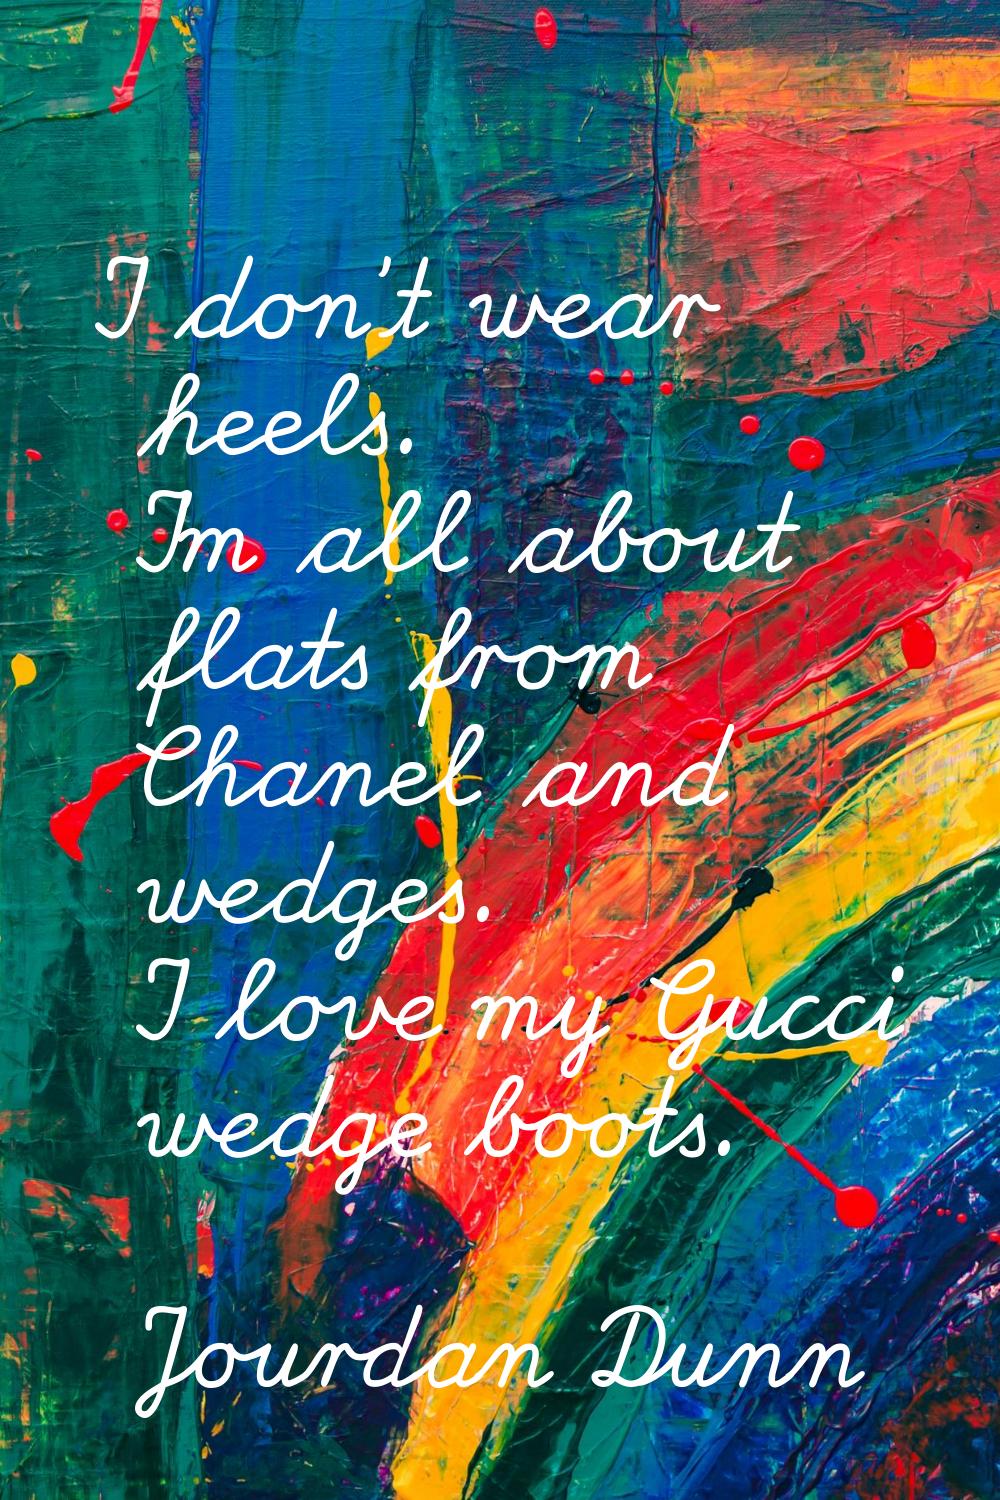 I don't wear heels. I'm all about flats from Chanel and wedges. I love my Gucci wedge boots.